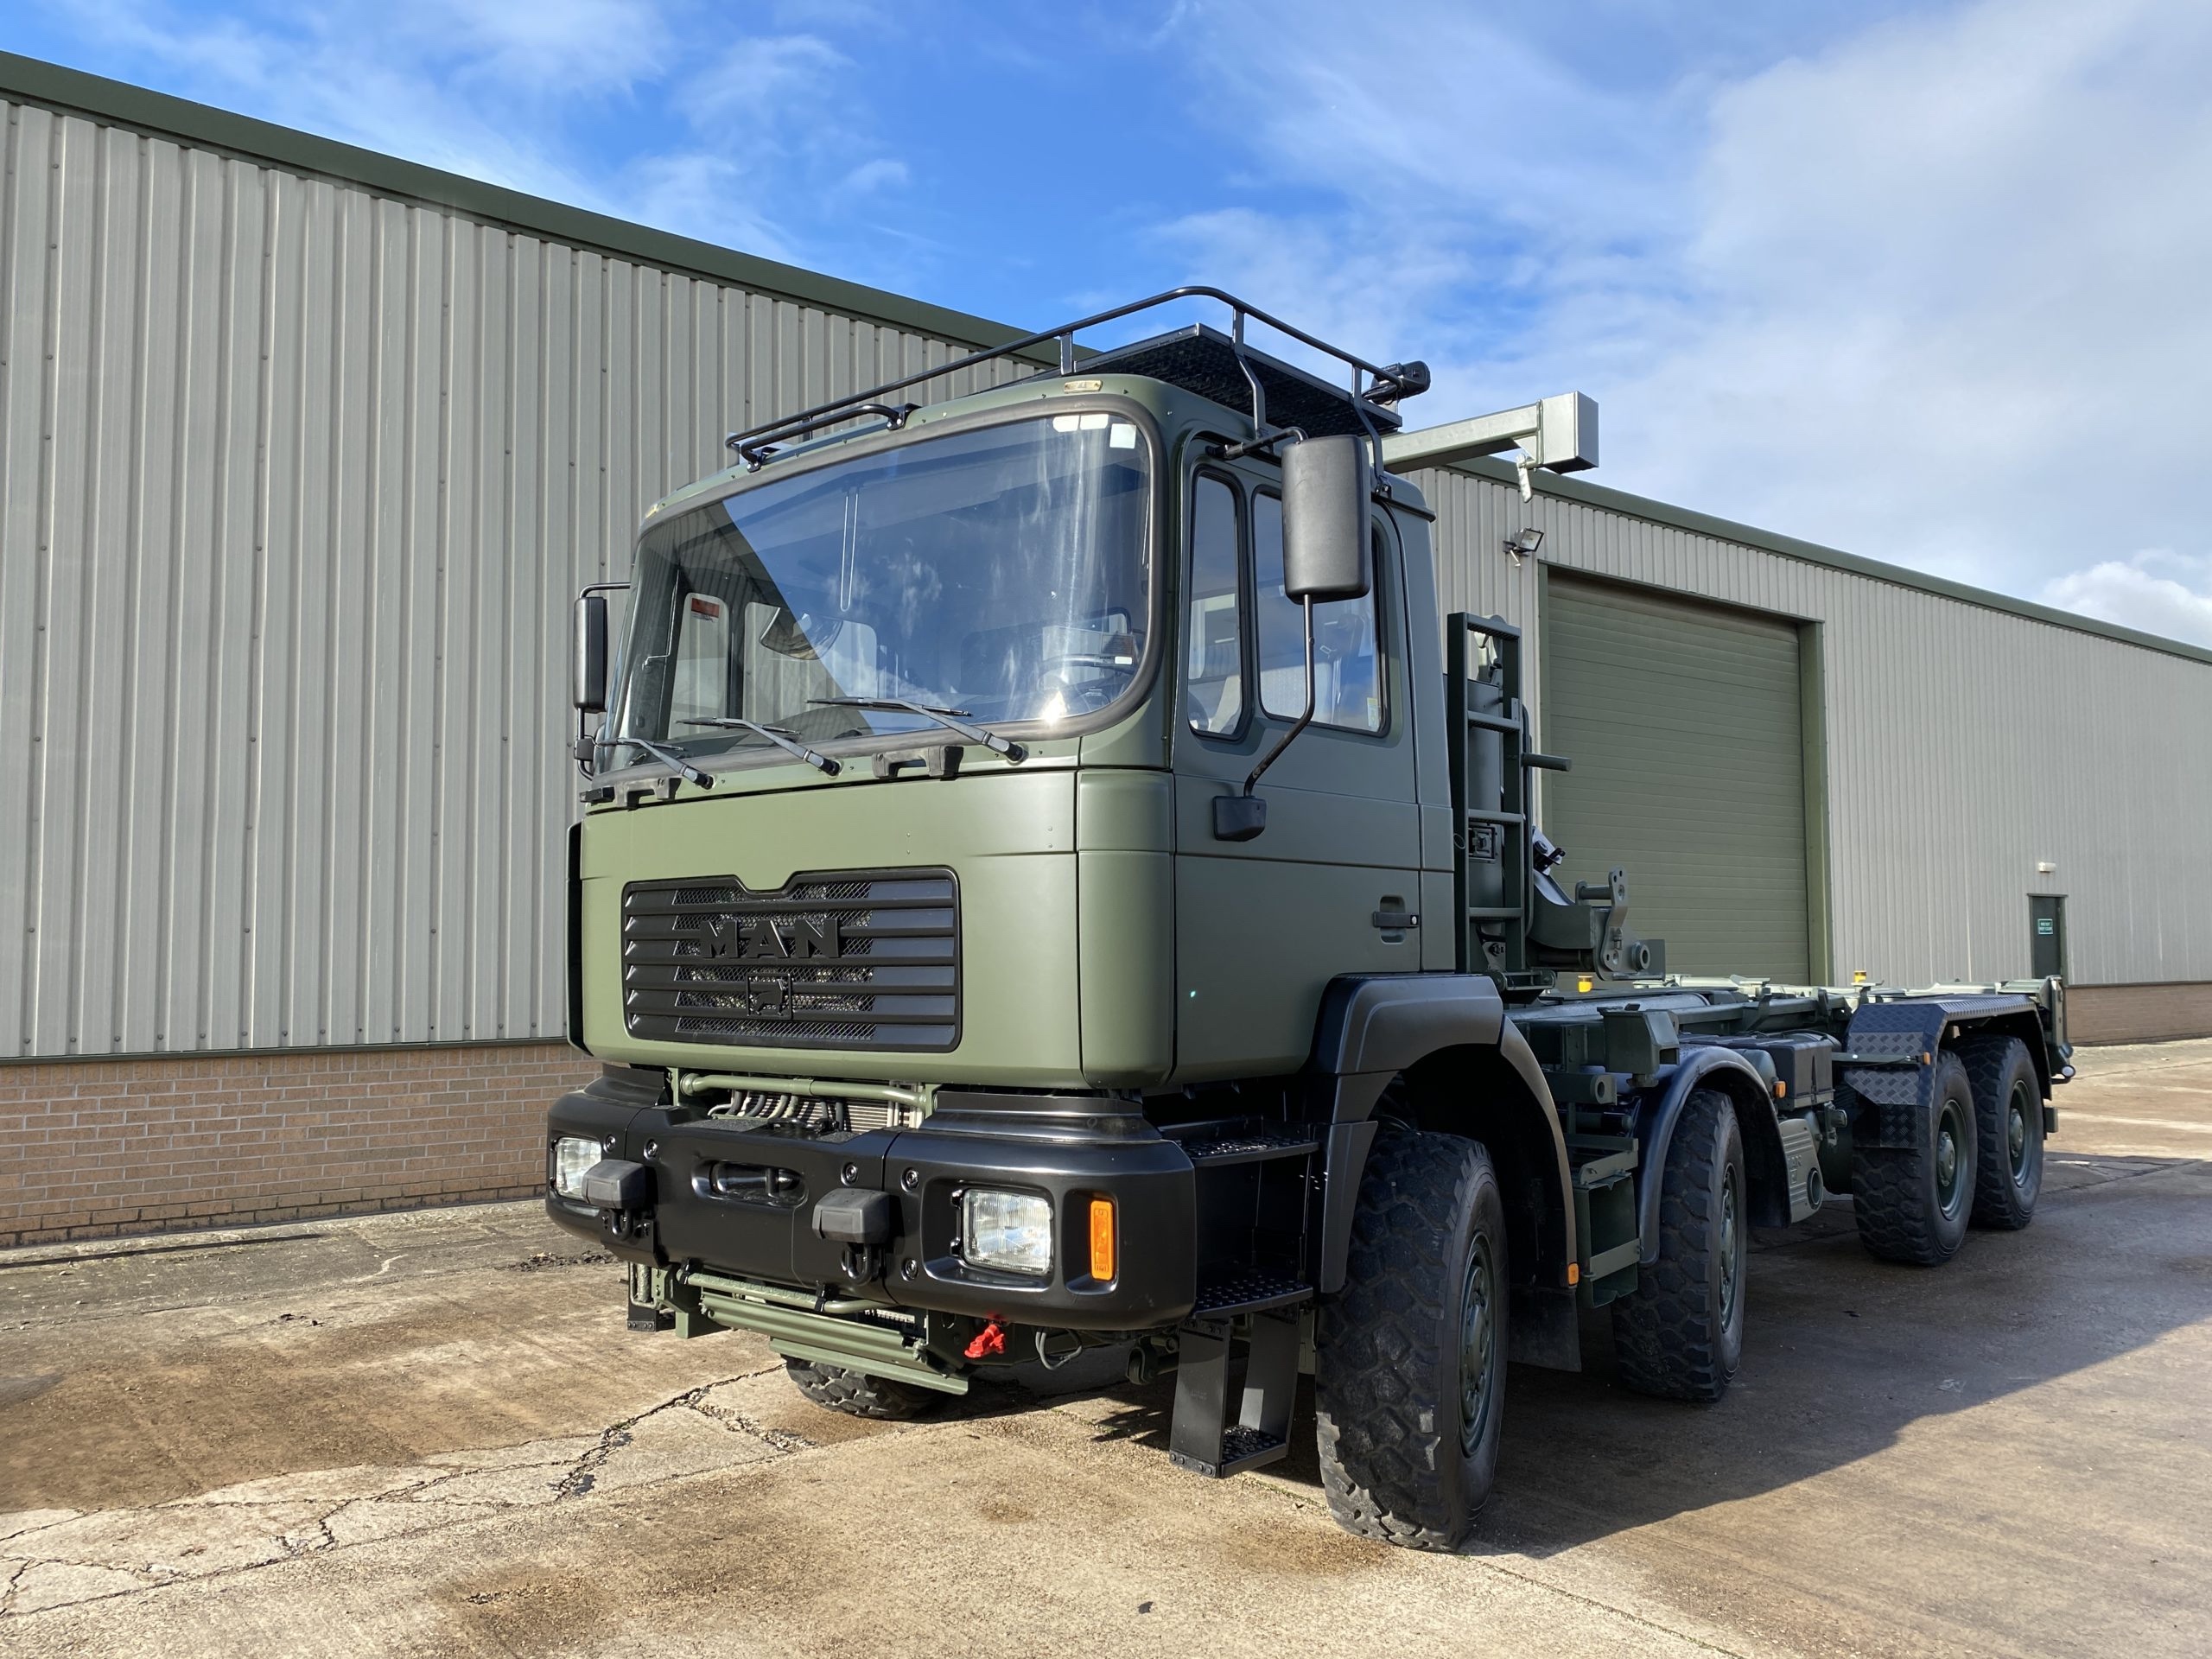 military vehicles for sale - MAN 35.464 8x8 Drops Truck 